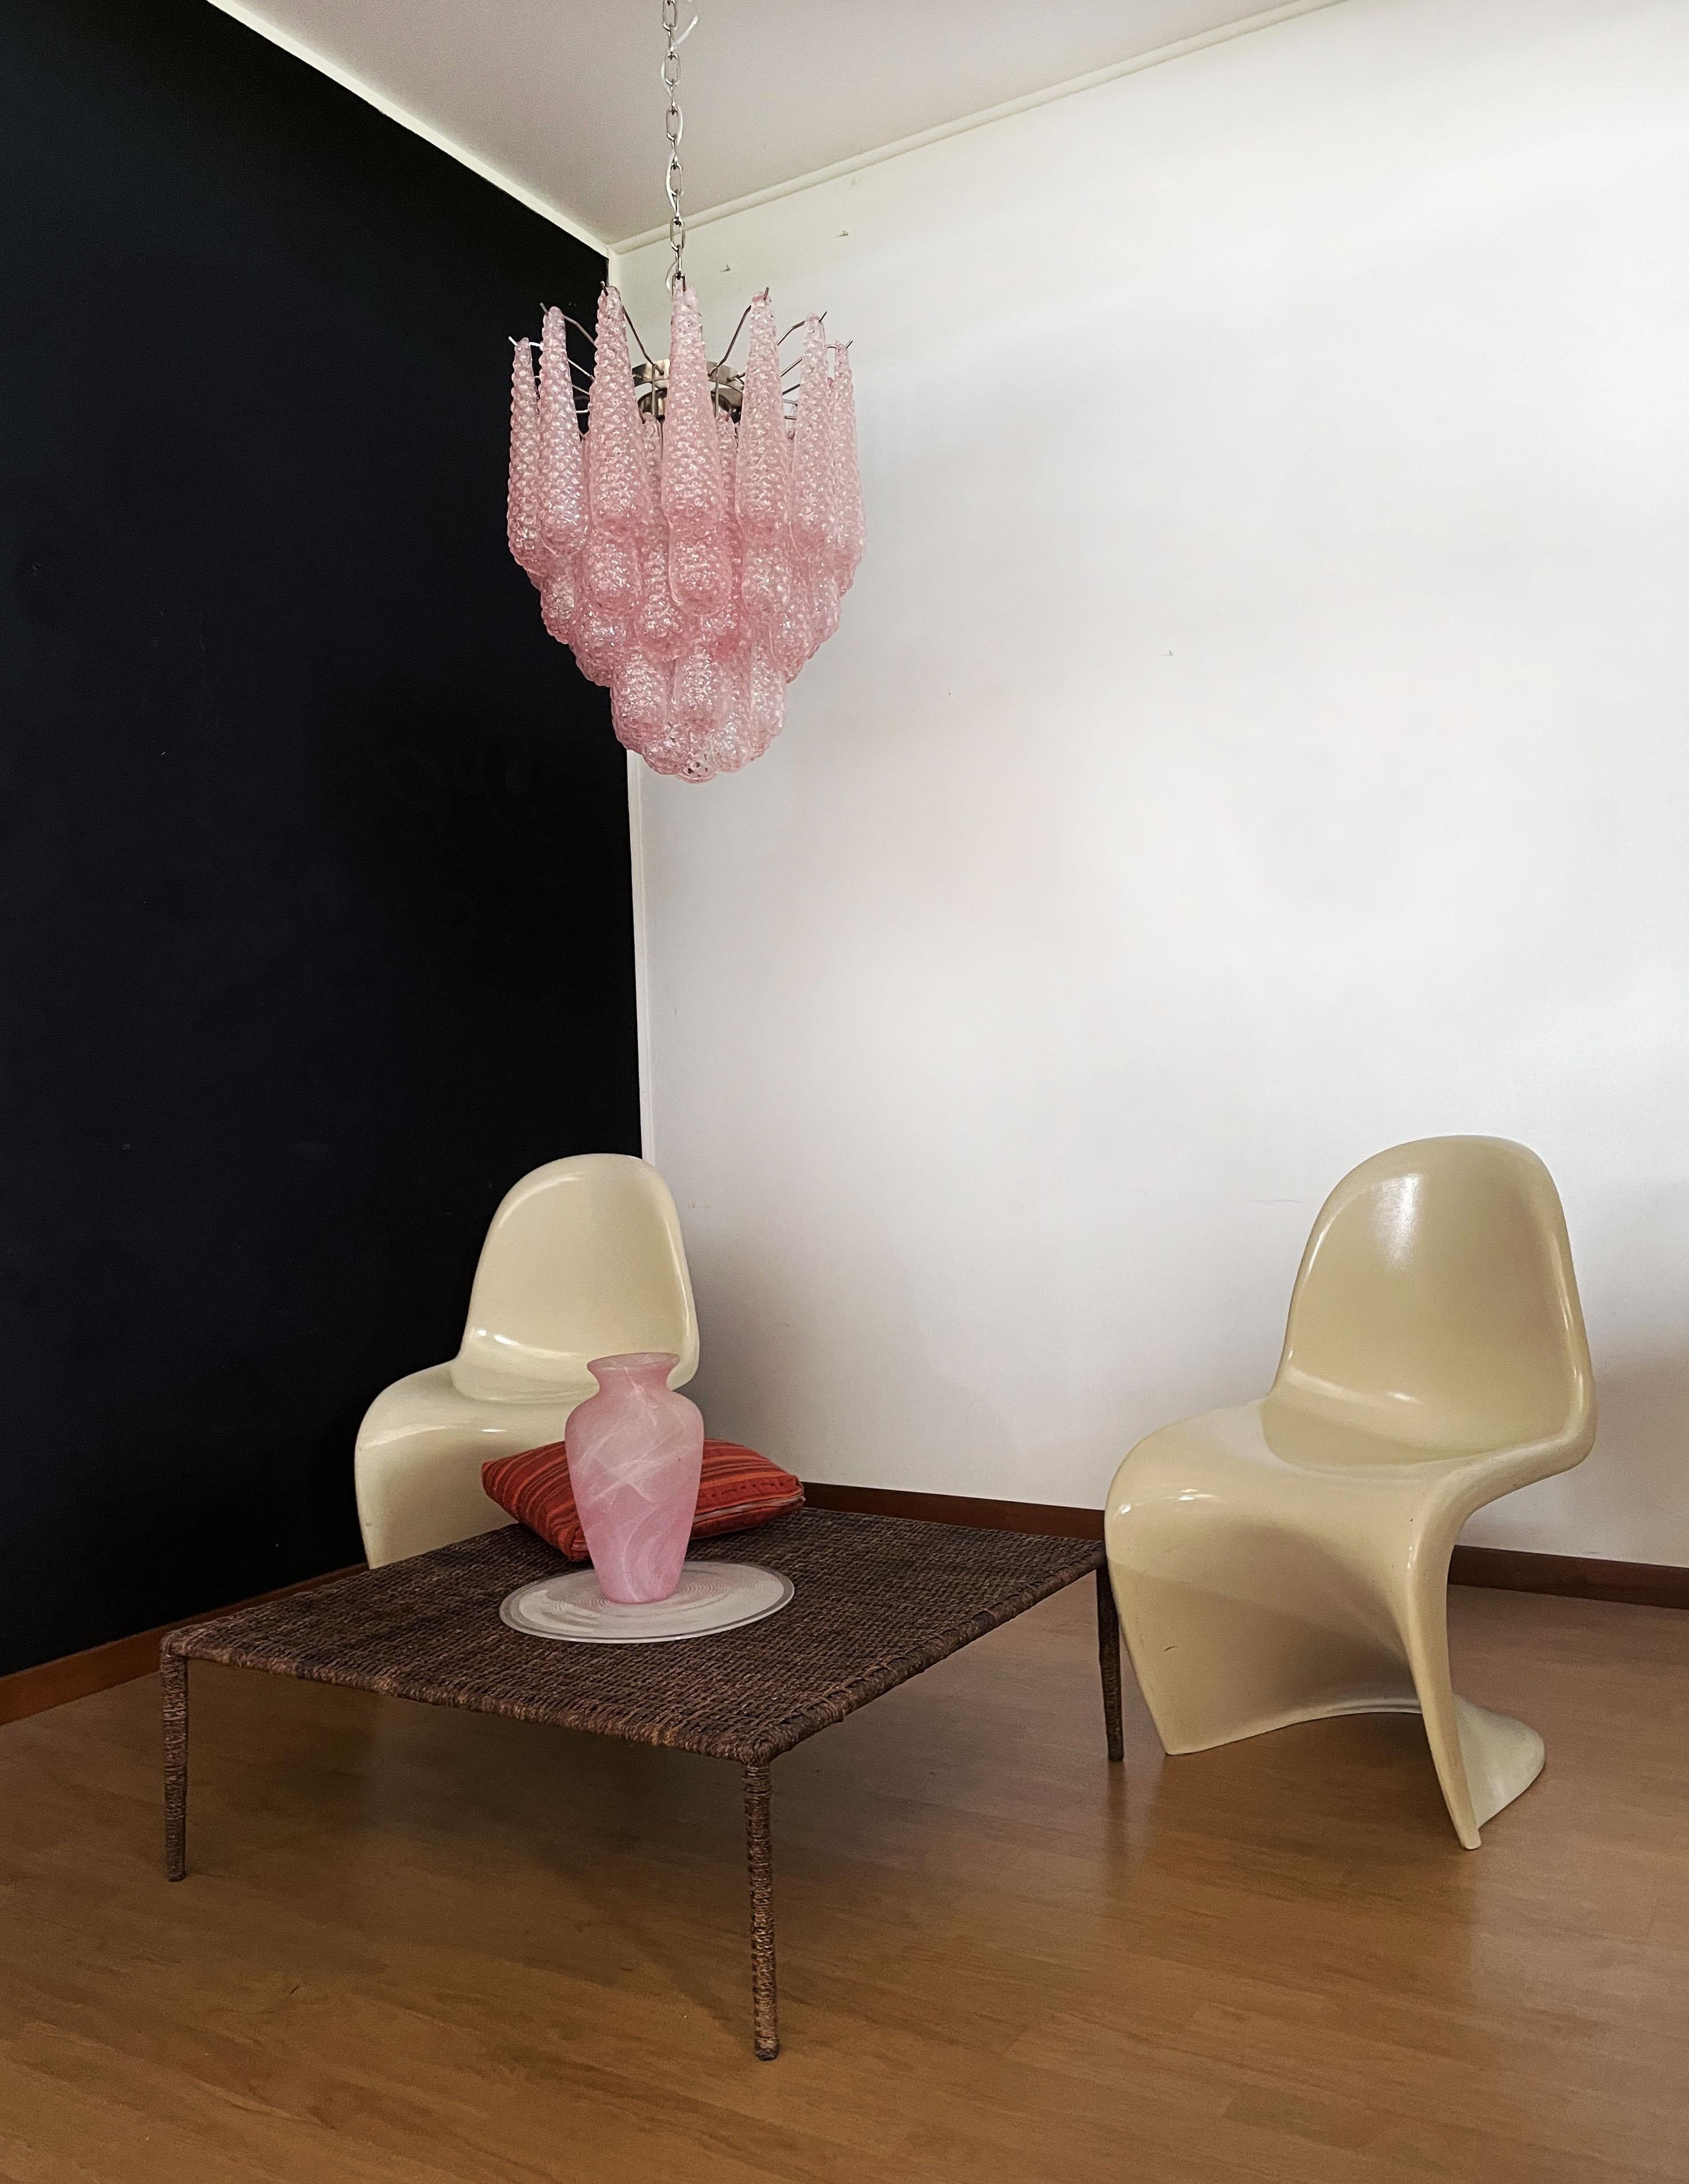 Italian vintage Murano chandelier made by 41 glass petals (Pink crystal, smooth outside, with powder and then rough inside.) in a chrome frame.
Period: late 20th century
Dimensions: 49.20 inches (125 cm) height with chain; 25.80 inches (68 cm)